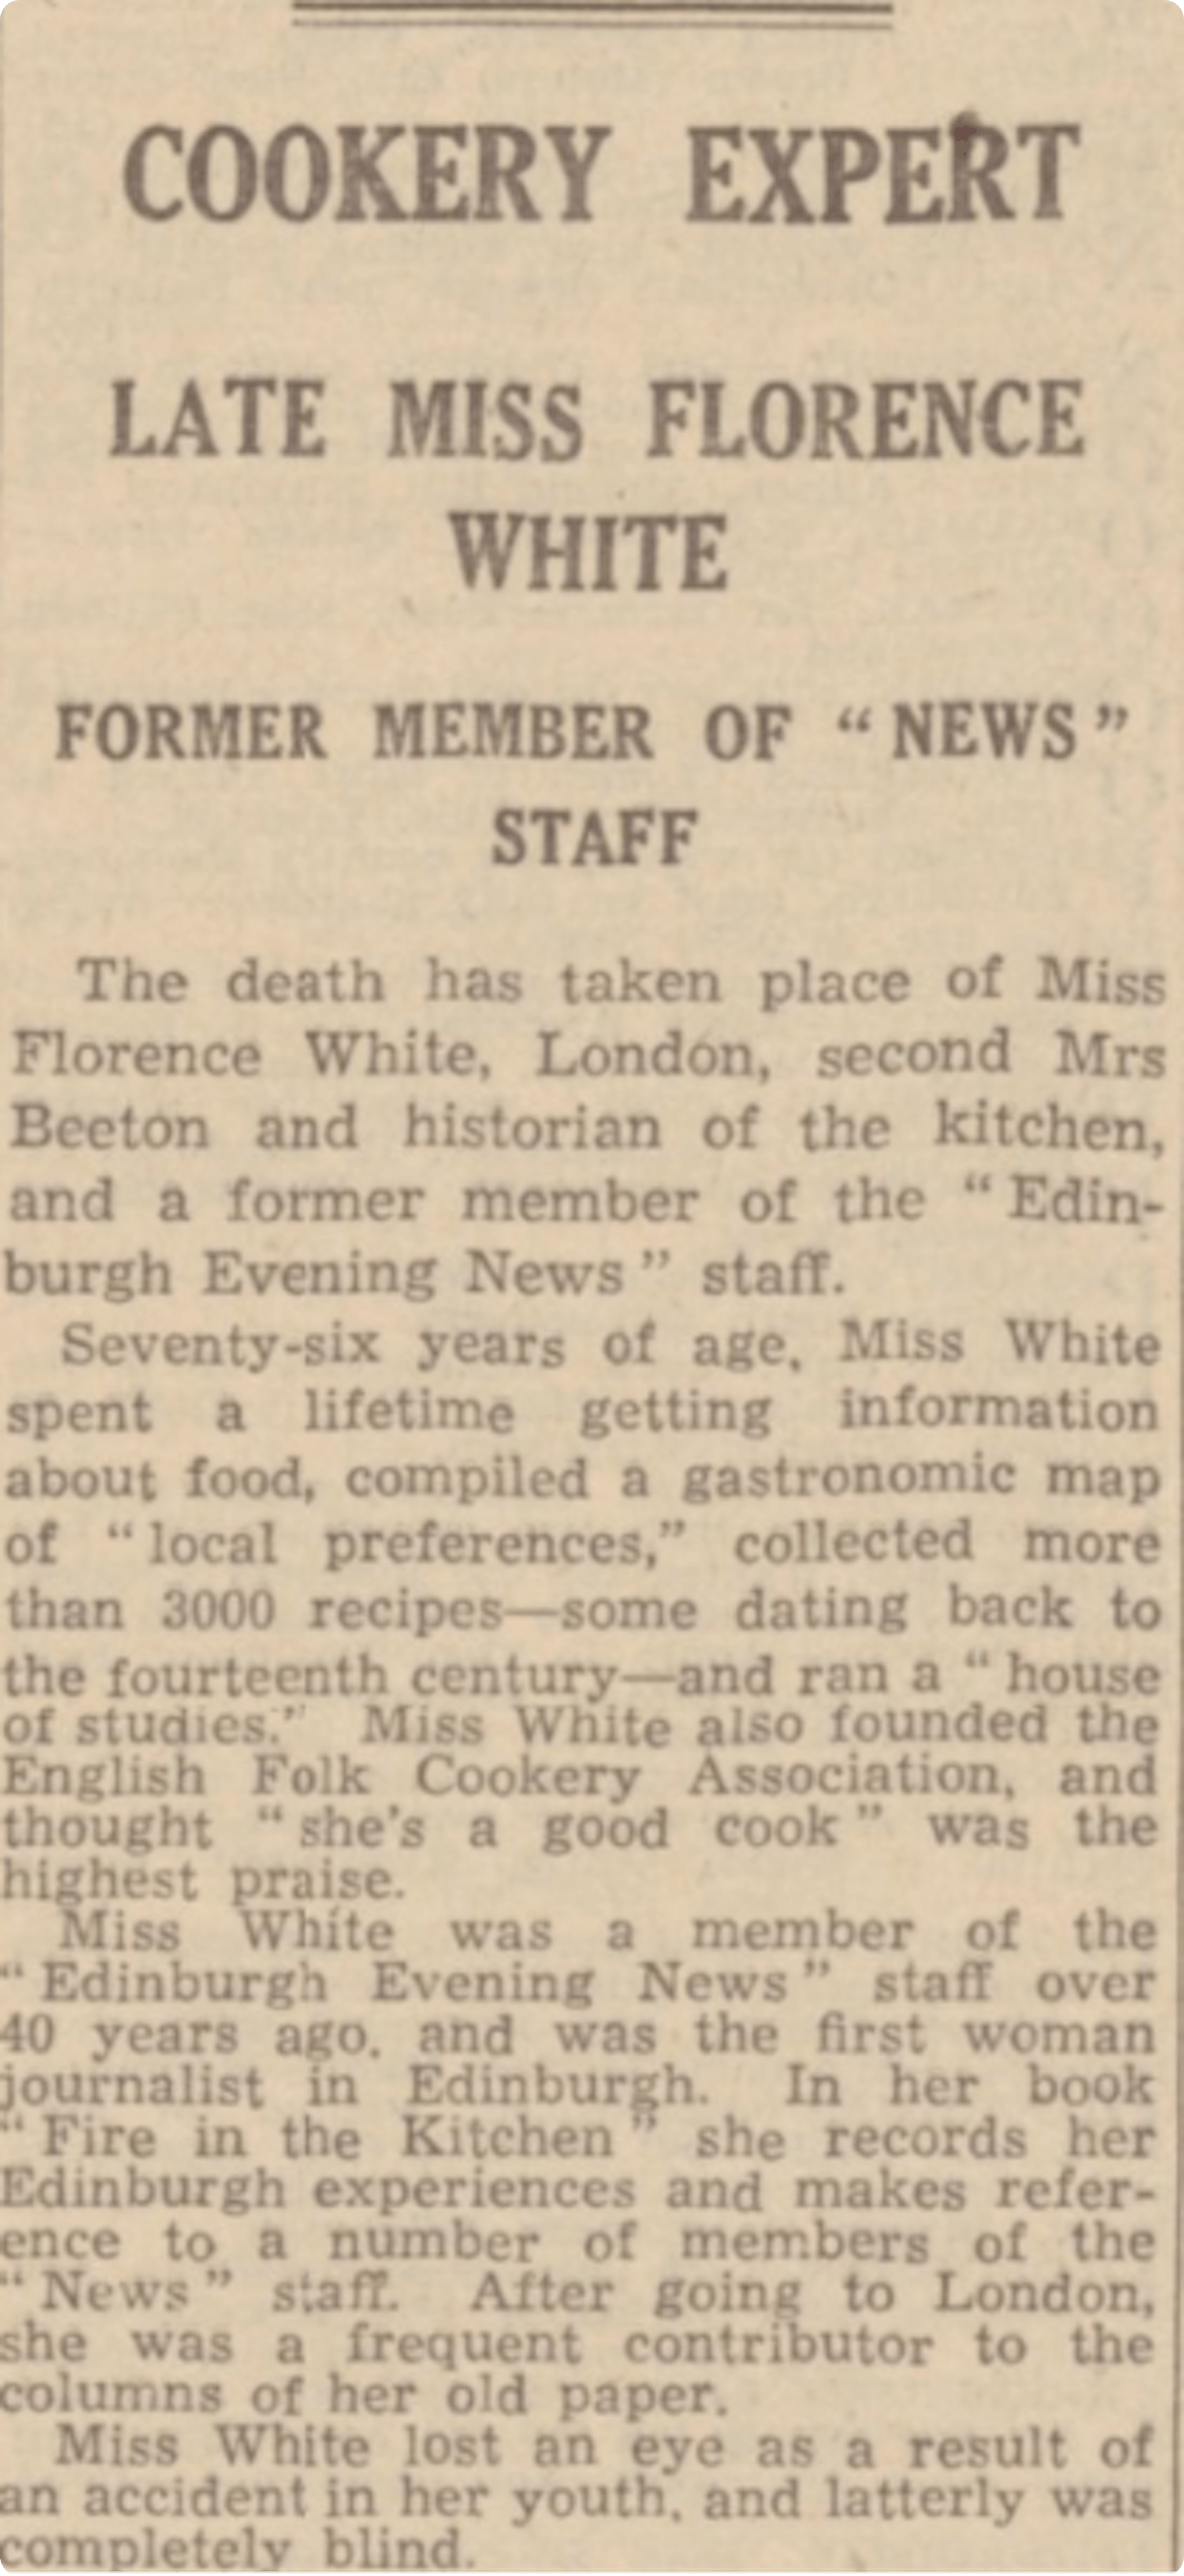 Florence's obituary in the Edinburgh Evening News, 16 March 1940.